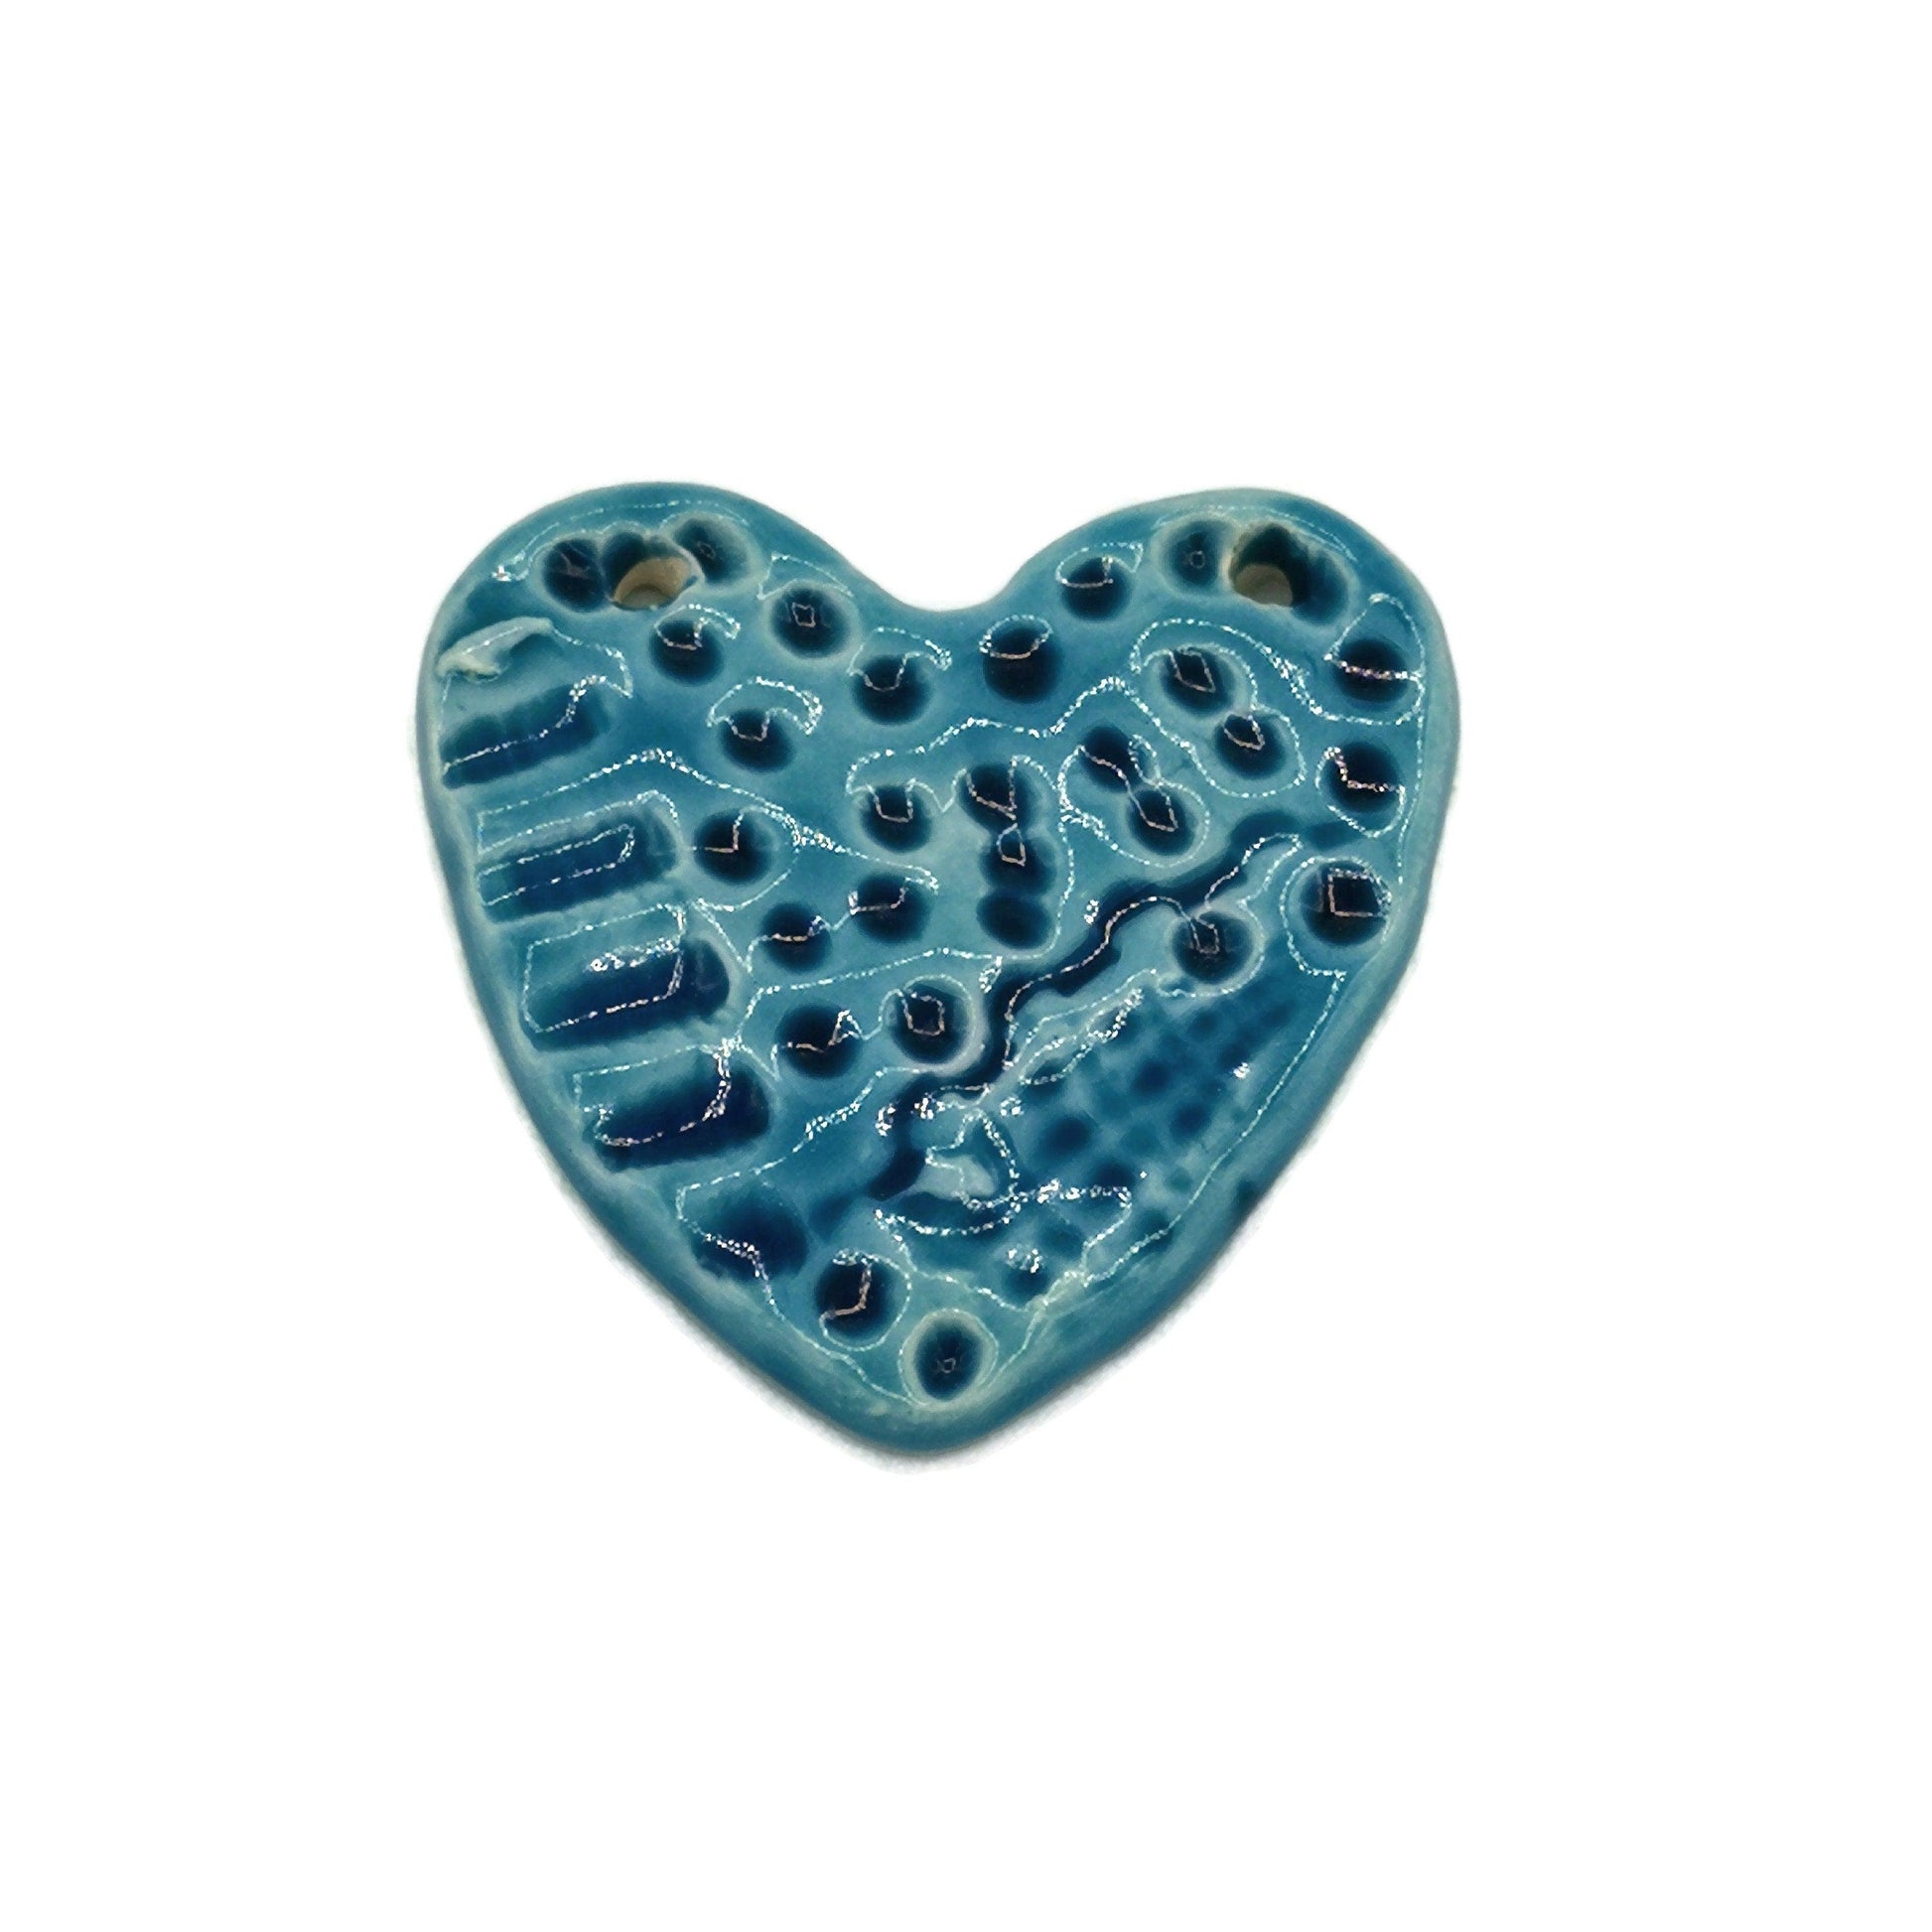 1Pc 55mm Handmade Ceramic Large Blue Heart Pendant For Necklace For Women, Jewelry Making Accessories, 2 Holes Unique Textured Clay Charms - Ceramica Ana Rafael